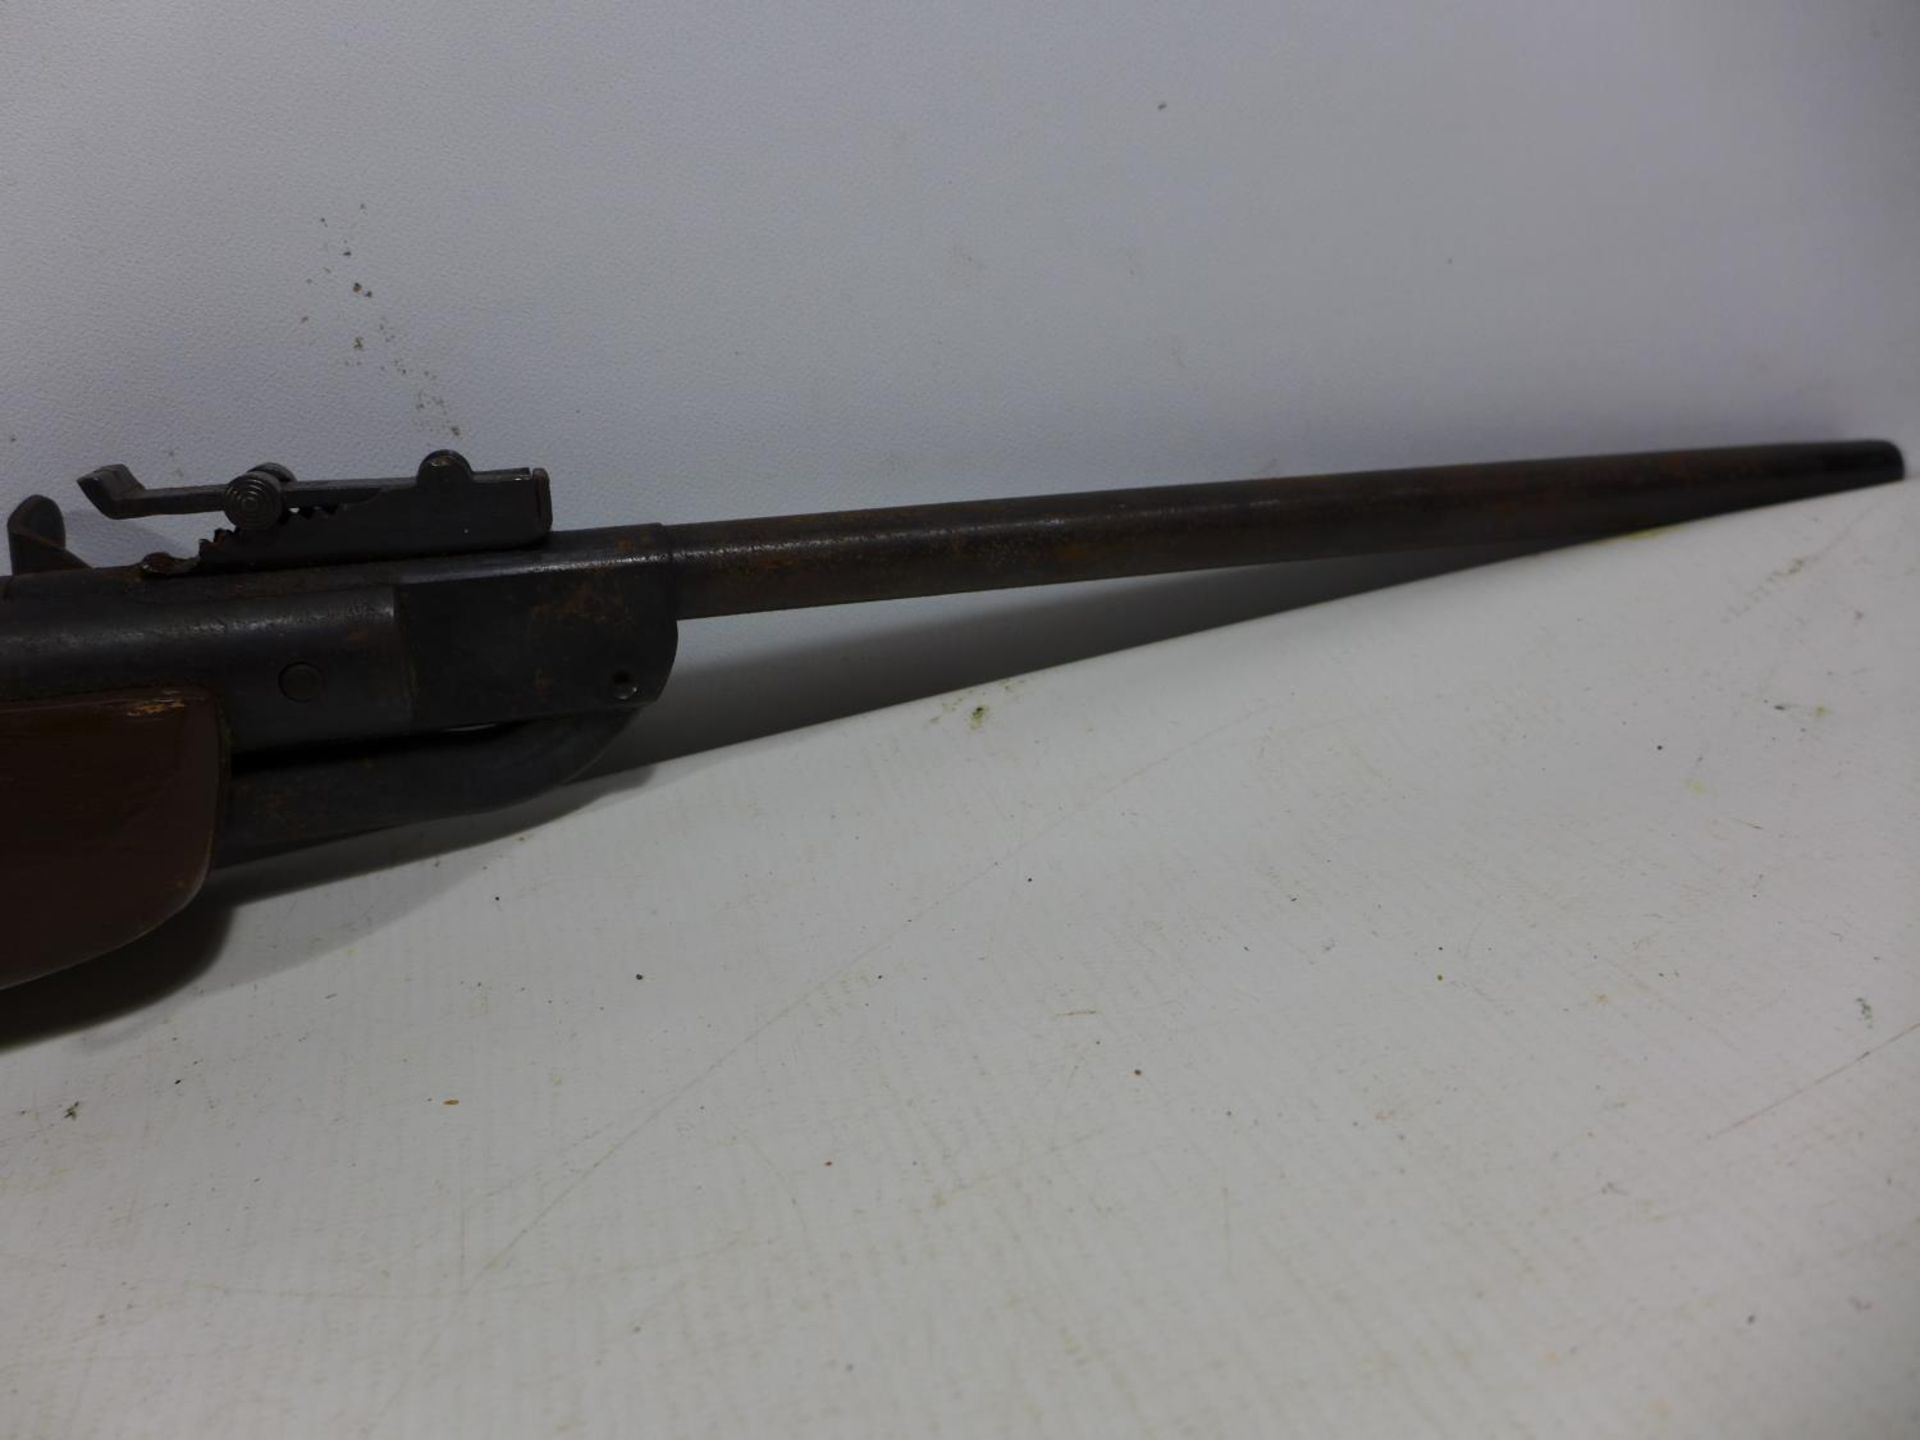 A .22 CALIBRE AIR RIFLE SERIAL NUMBER 110424451, 36CM BARREL, LENGTH 96CM, TOGETHER WITH SLIP CASE - Image 6 of 8